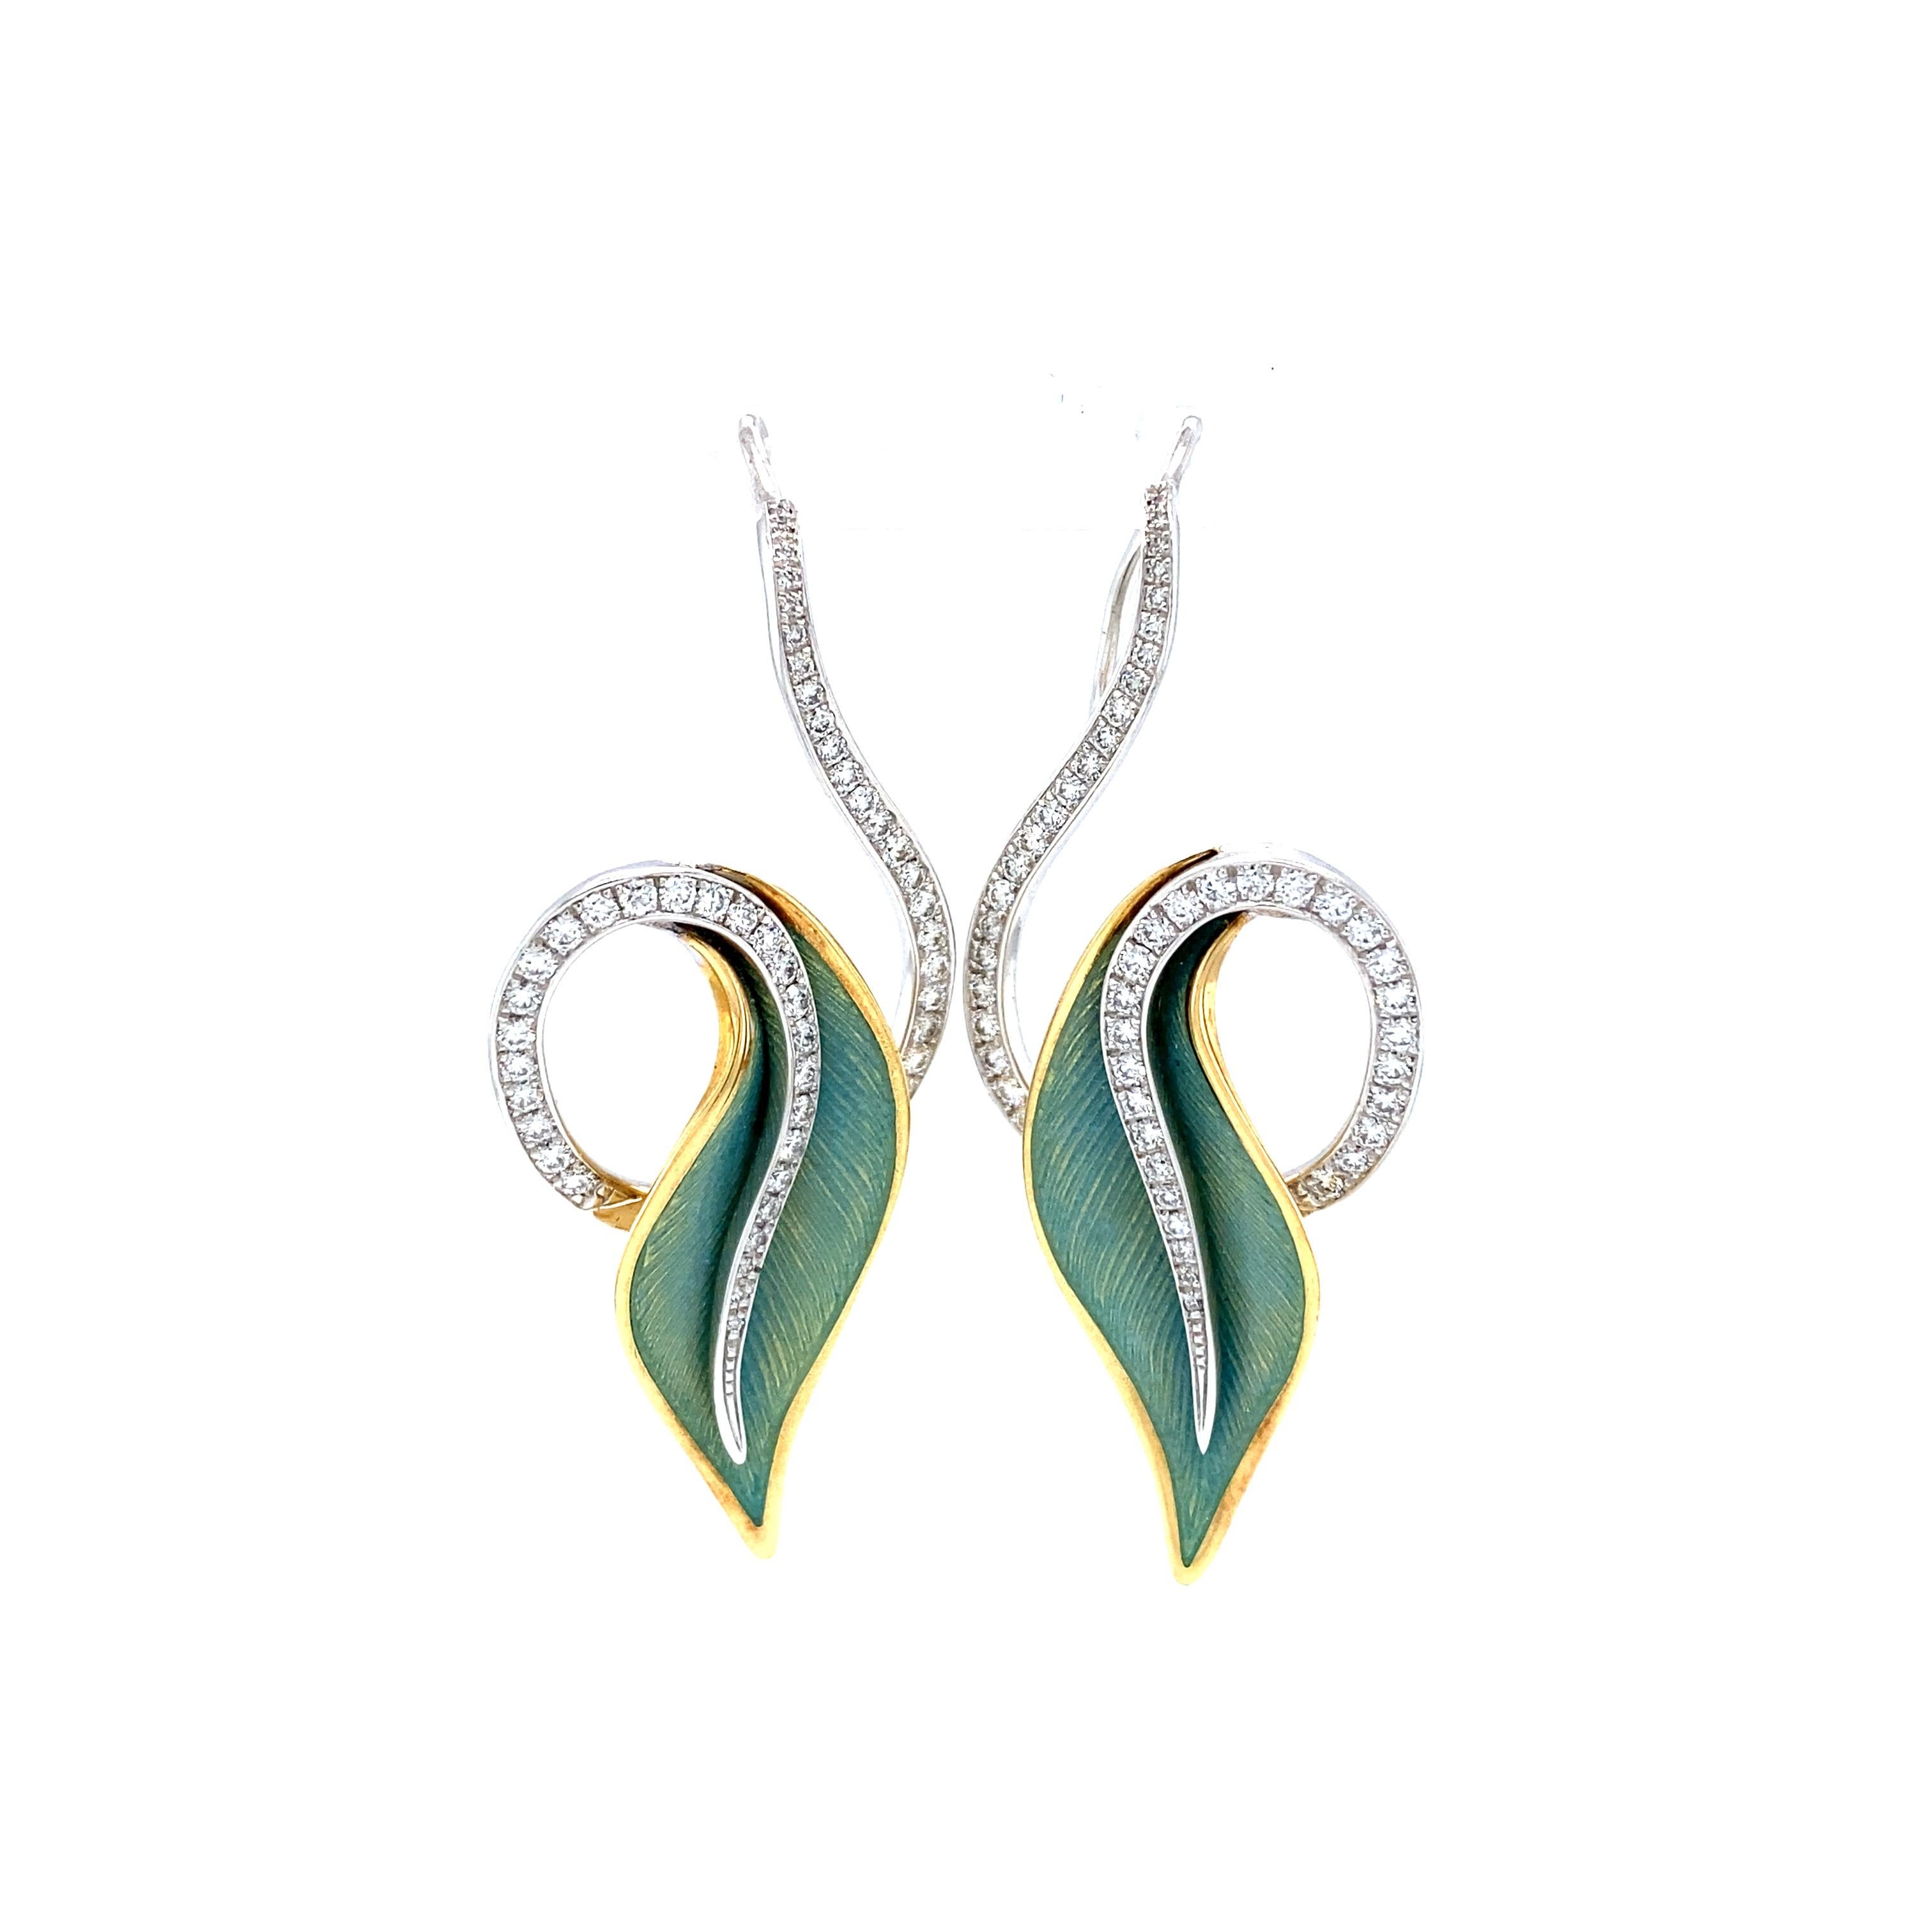 Victor Mayer leave shaped earrings 18k White Gold and Yellow Gold, Serenade collection, translucent opalescent turquoise vitreous enamel, 102 diamonds, total 0.86 ct, G VS, brilliant cut, measurements  app. 43 mm x 20 mm

About the creator Victor